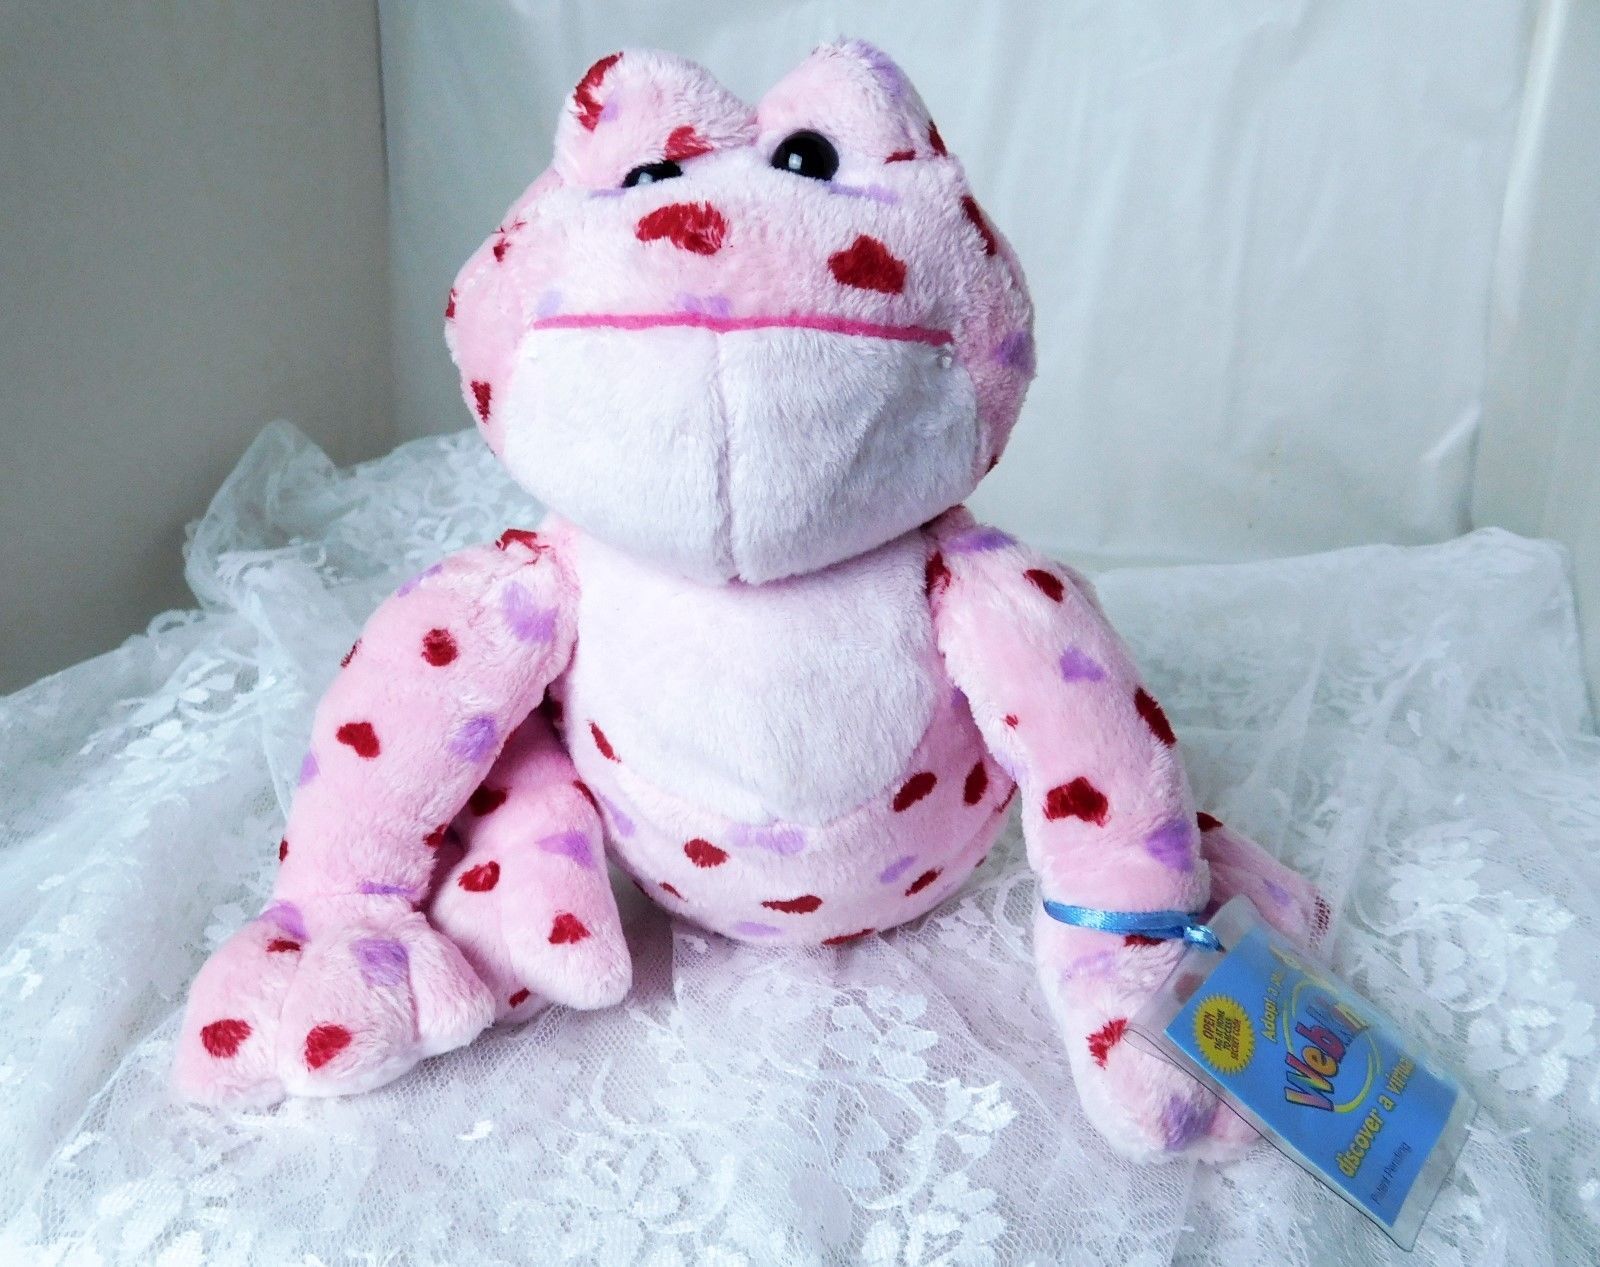 GANZ Plush Love Frog Webkinz 8" Pink Plush Toy with Tag HM144 - Super Cute! - £9.66 GBP